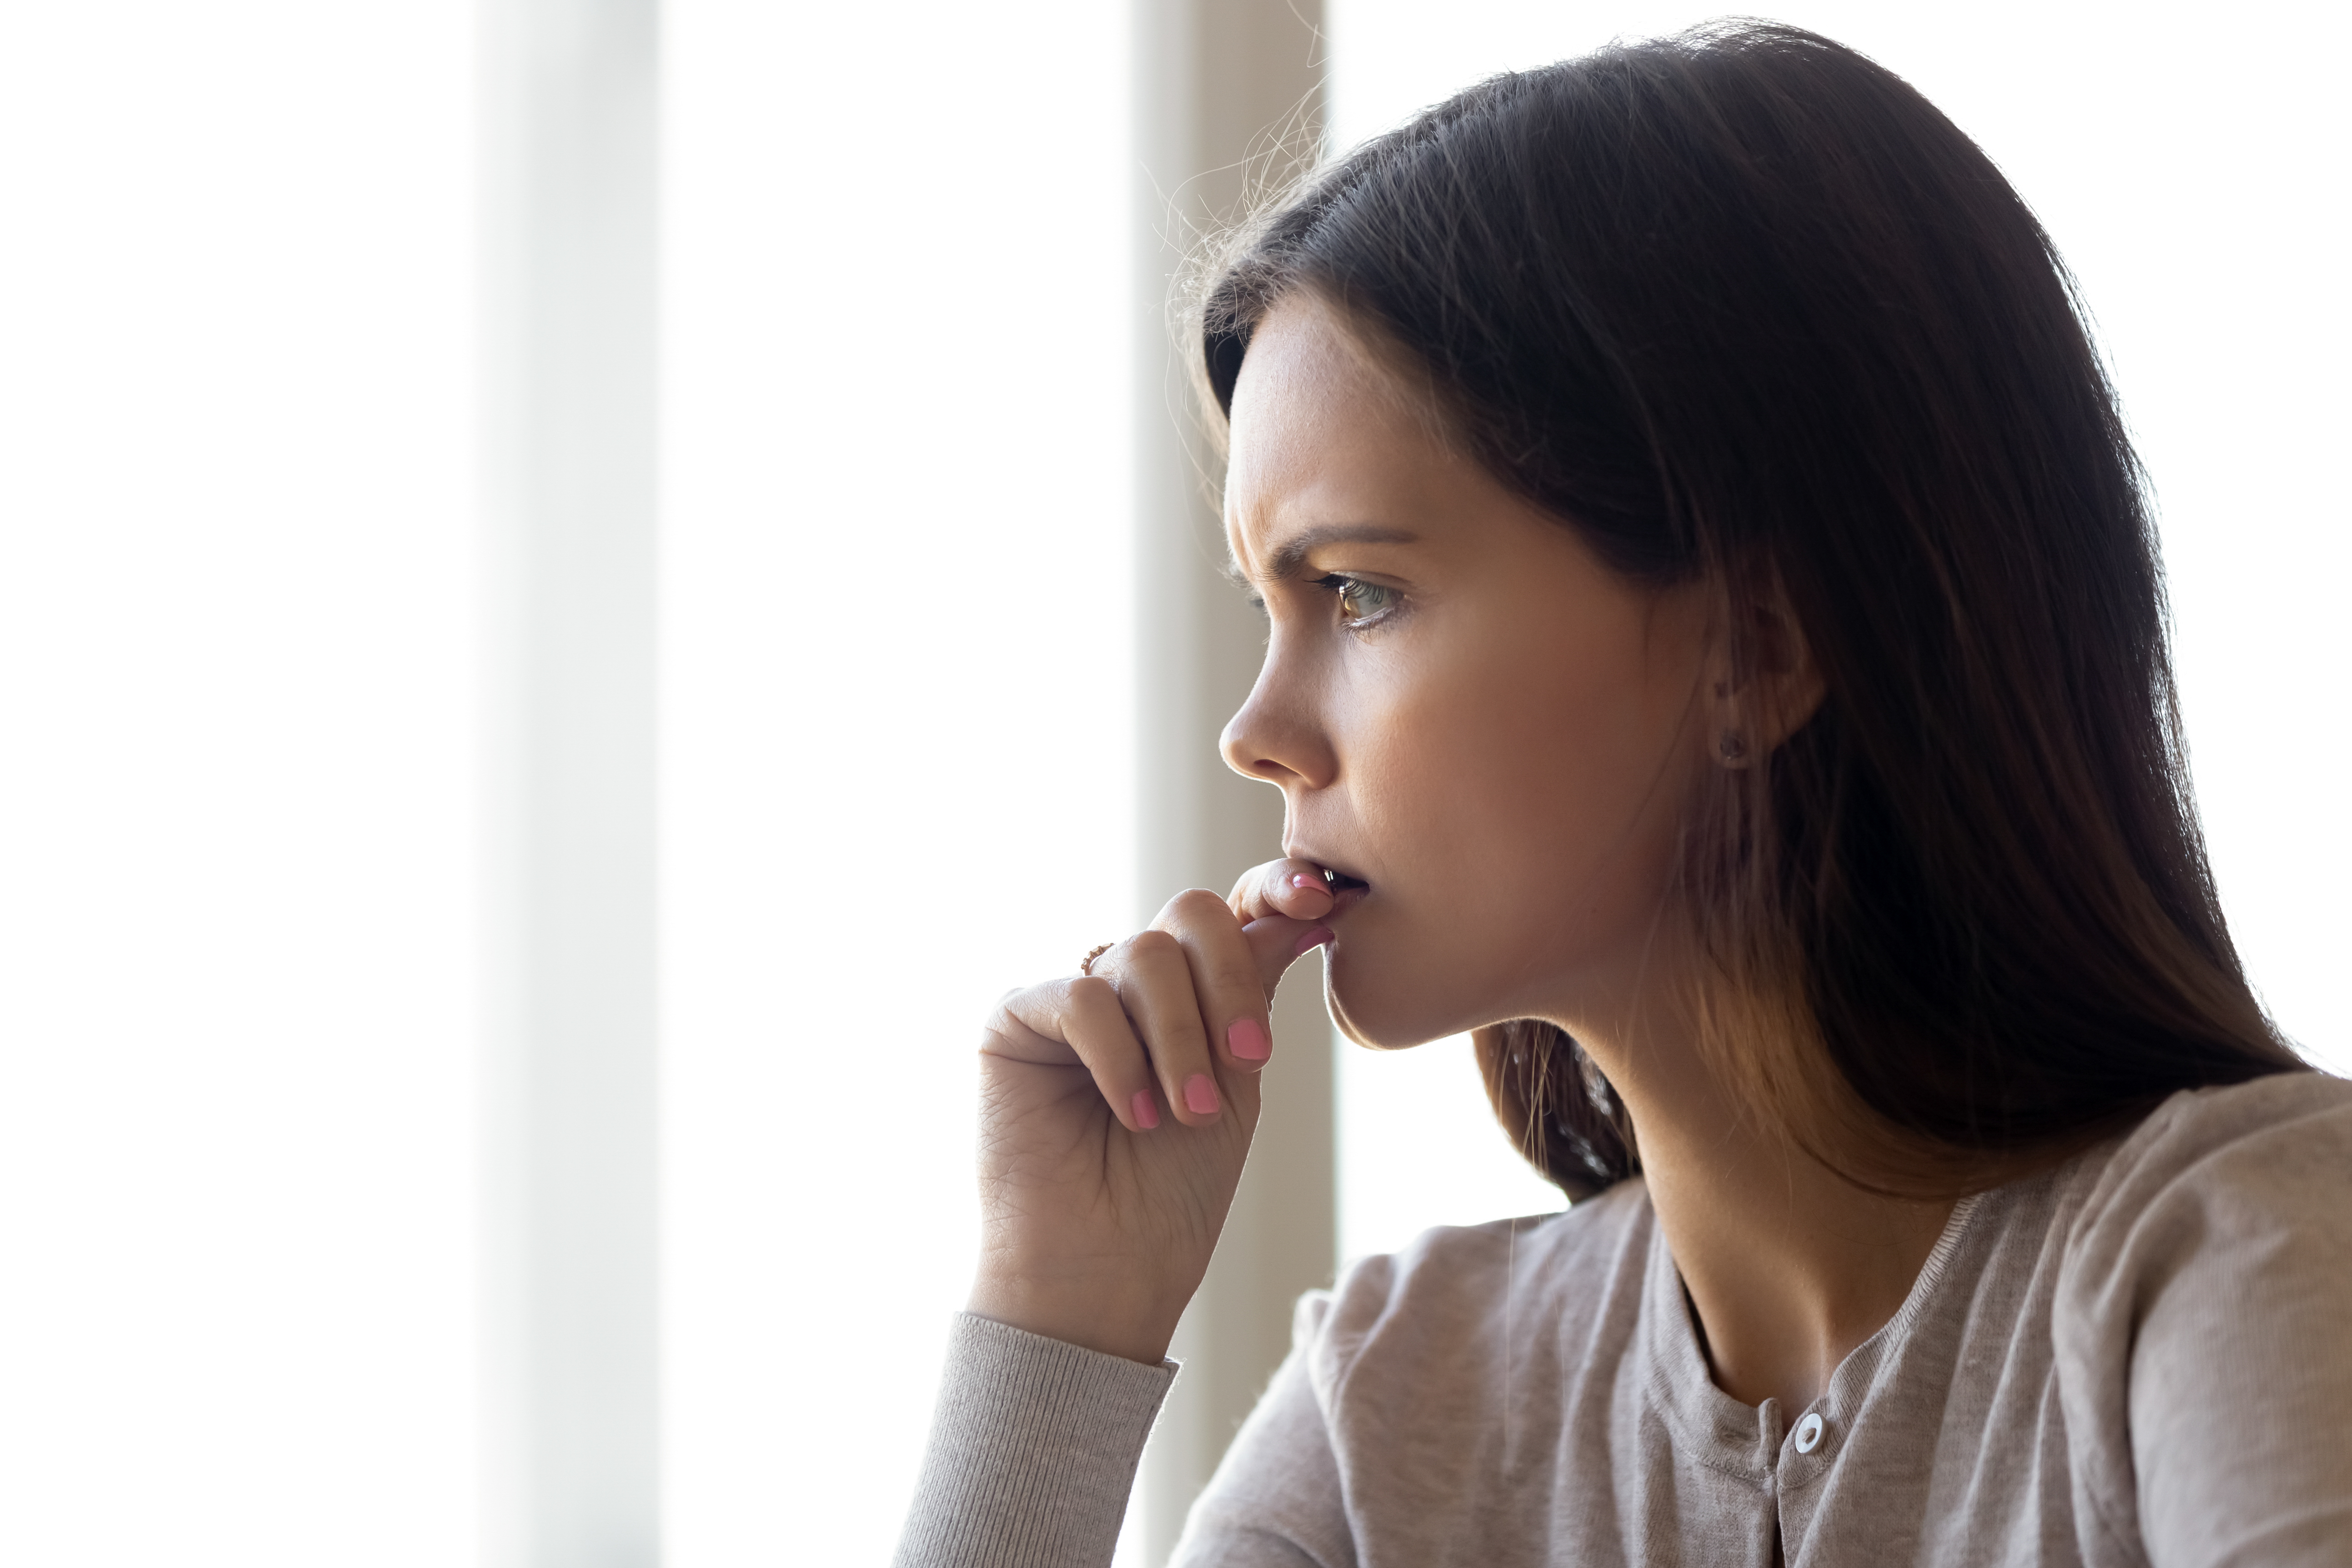 A woman lost in deep thoughts | Source: Shutterstock